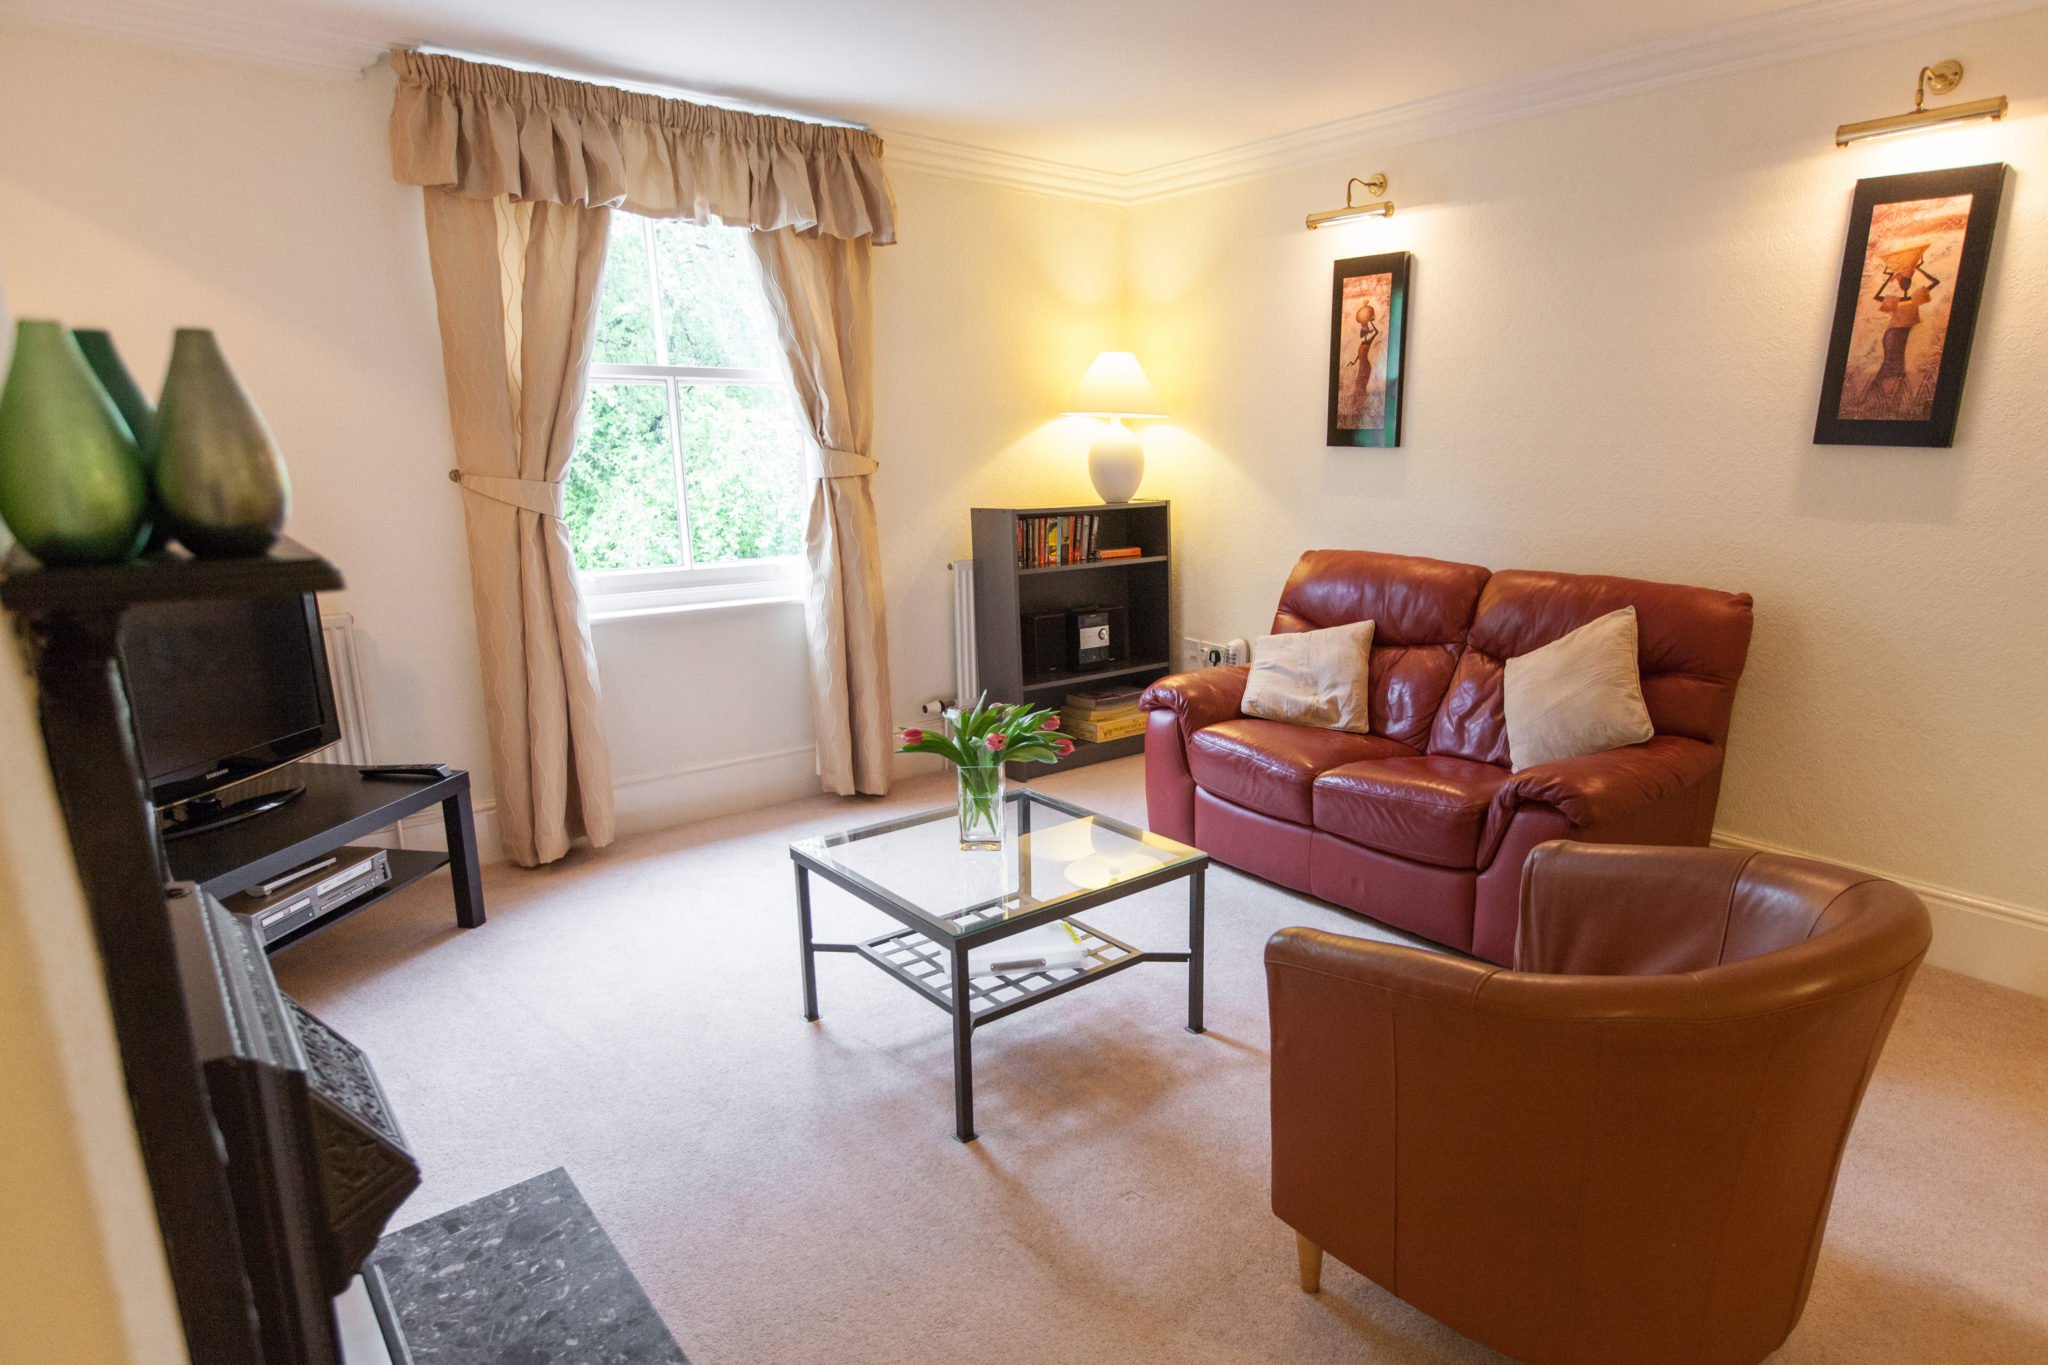 Knutsford-Serviced-Apartments-Cheshire-available-now!-North-England-Serviced-Accommodation-Manchester-Airport---Urban-Stay